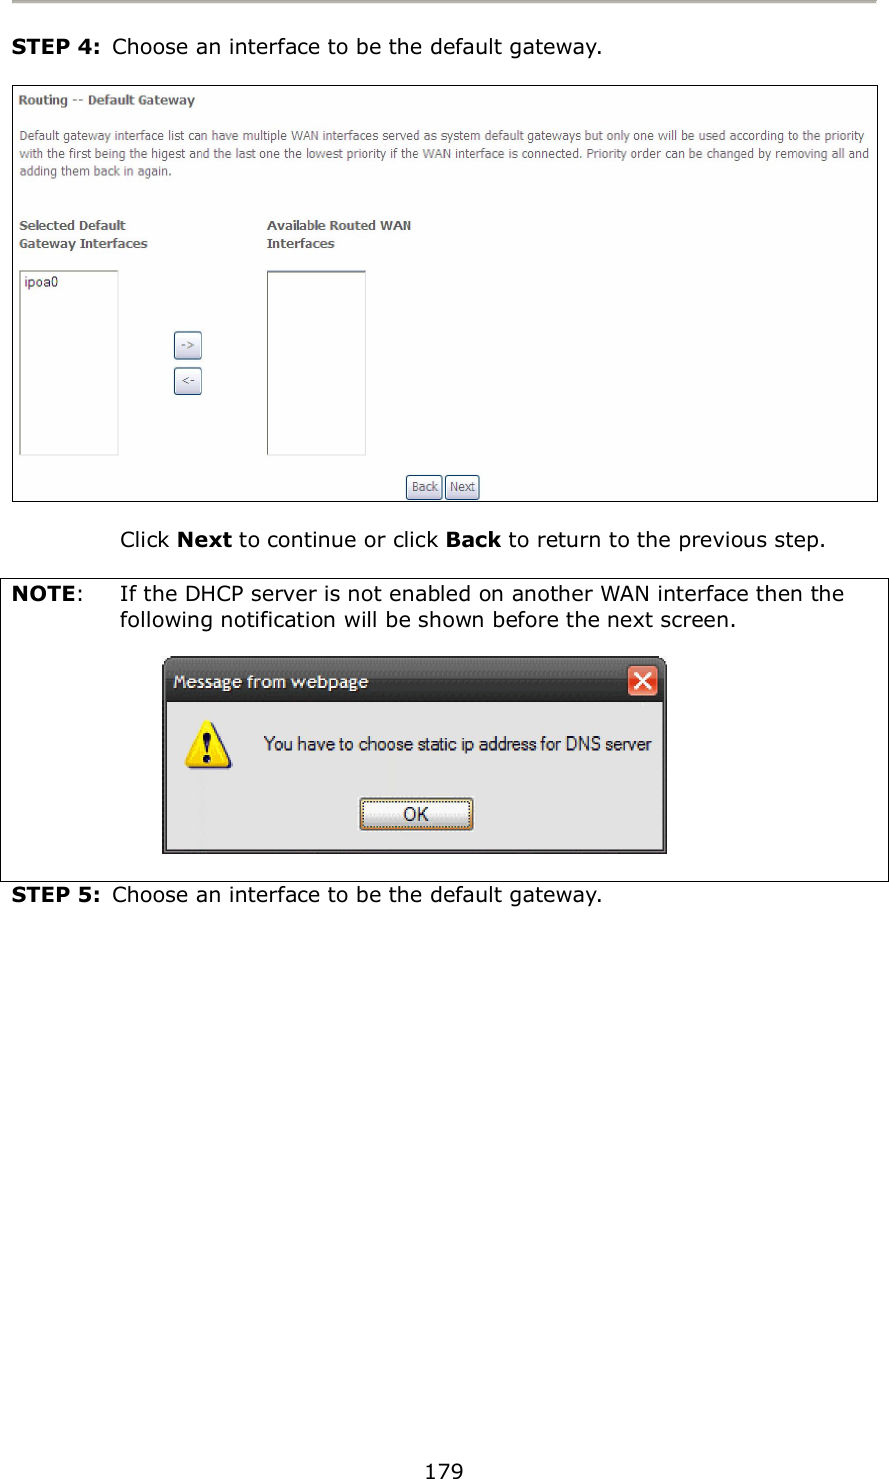  179   STEP 4:  Choose an interface to be the default gateway.      Click Next to continue or click Back to return to the previous step.  NOTE:  If the DHCP server is not enabled on another WAN interface then the following notification will be shown before the next screen.        STEP 5:  Choose an interface to be the default gateway. 